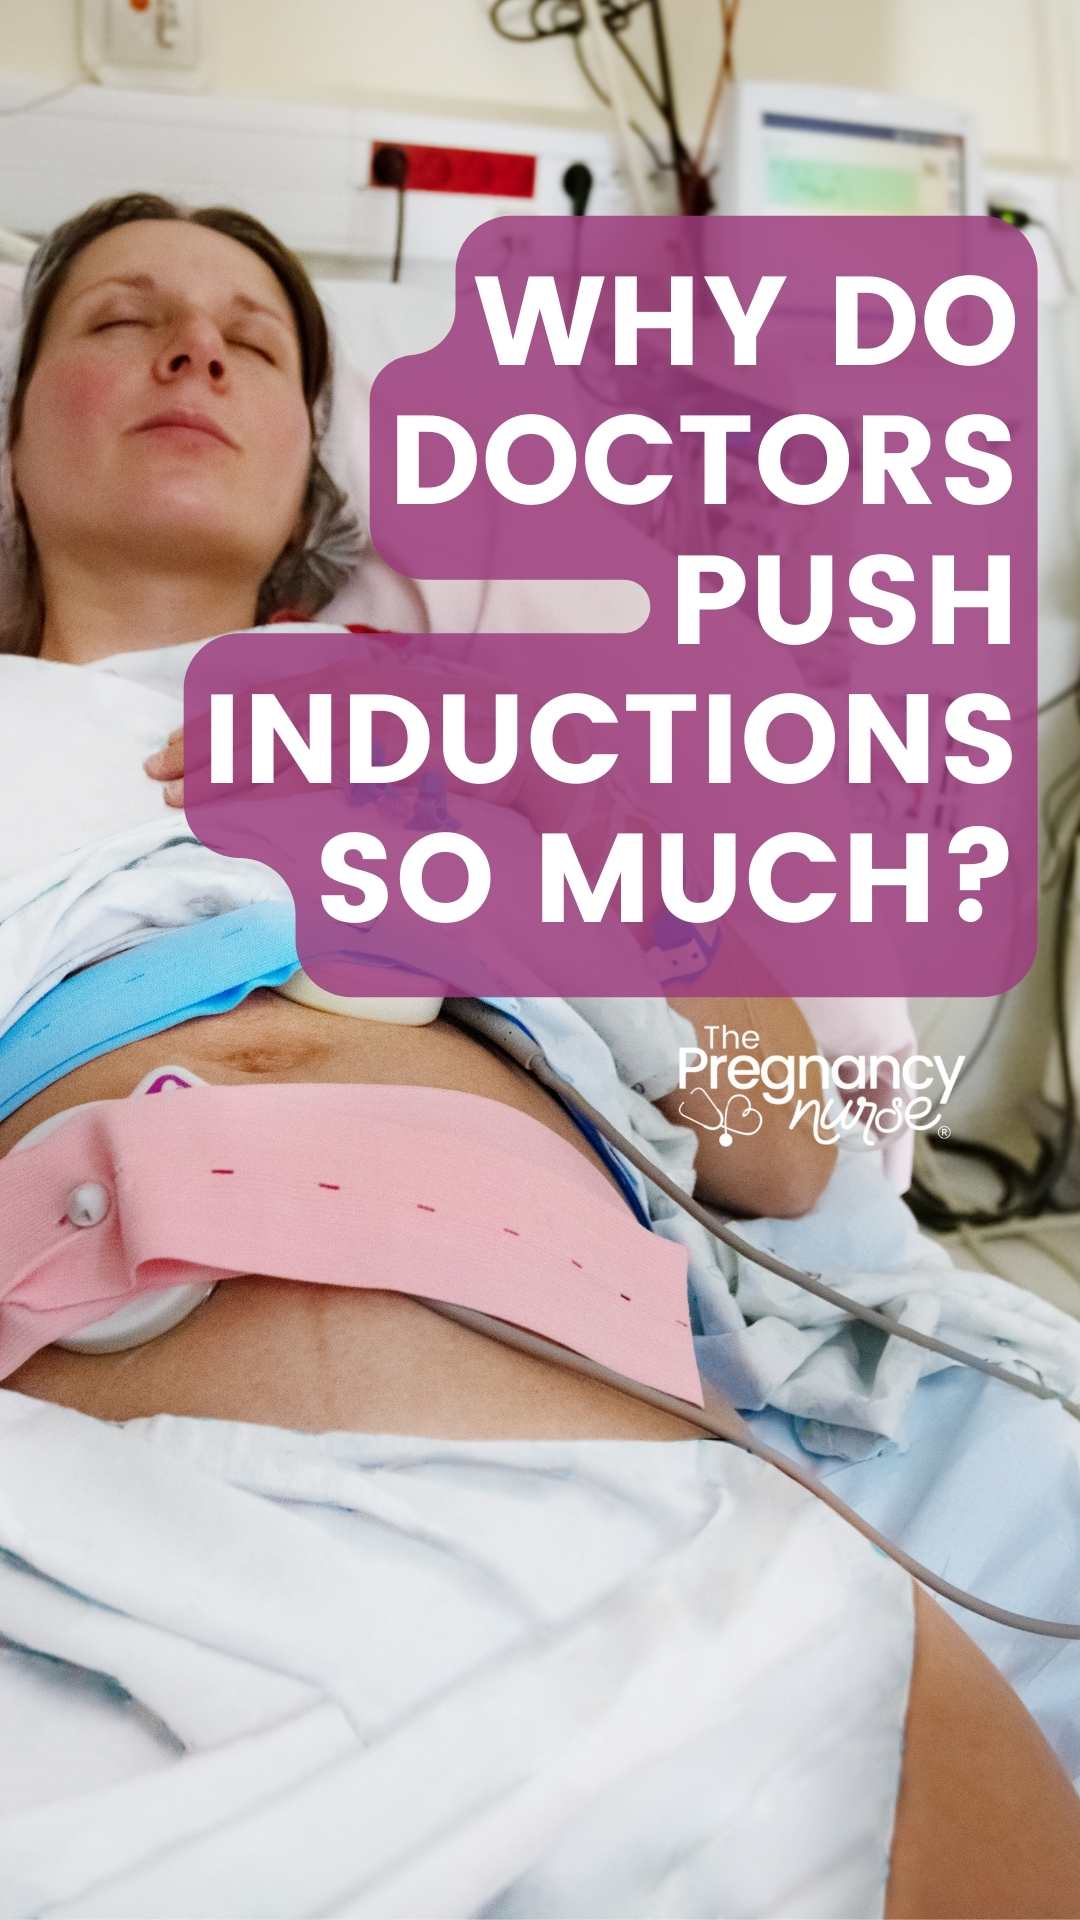 There can be a lot of pressure from doctors and loved ones to induce labor, but it's important to know all your options before making any decisions. This post explains the reasons why doctors may push for an induction and what you can do if you're not comfortable with that option.